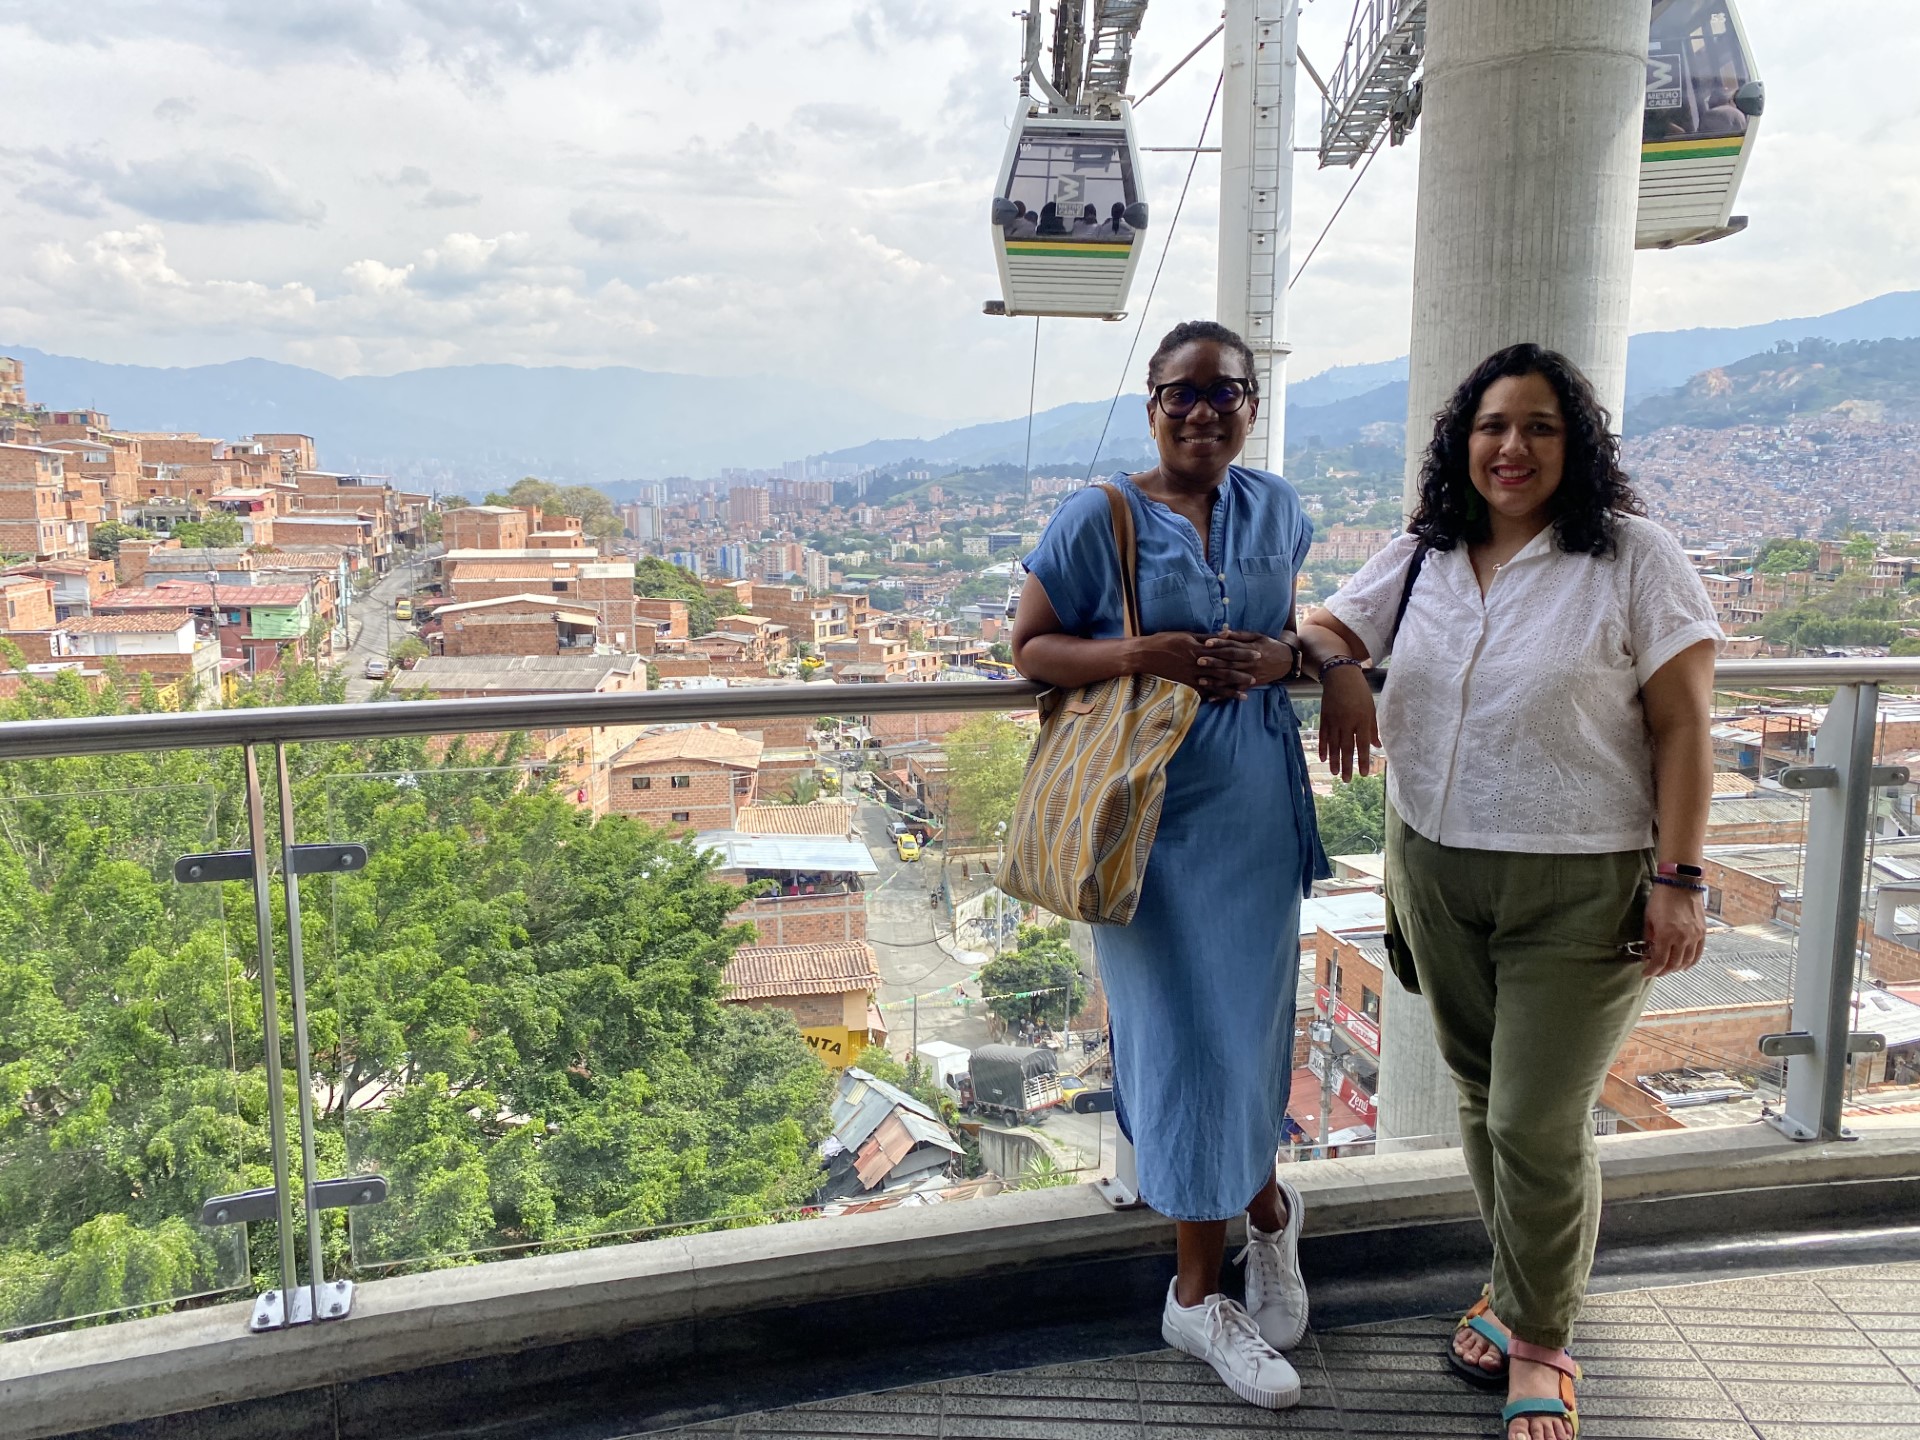 Dr. Natasha Duncan and Carina Olaru at the Metro Cable in Medellín